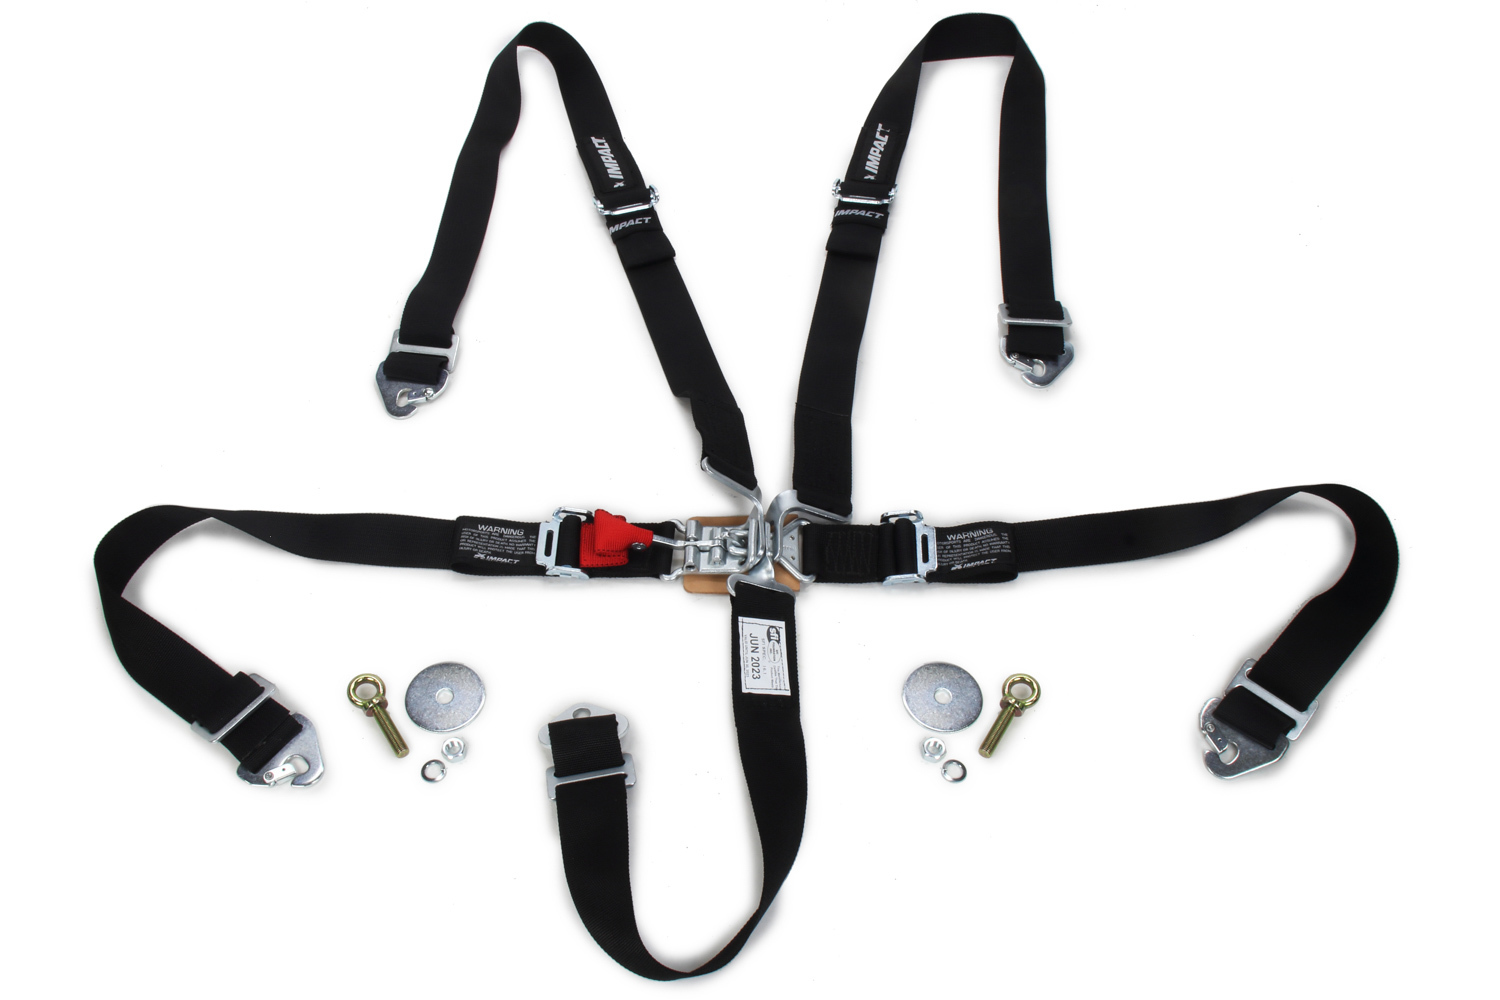 Impact 53119229 - Harness, 5 Point, Latch and Link, SFI 16.1, Pull Down Adjust, Snap-on / Wrap Around, 2 in Straps, Individual Harness, Black, Kit